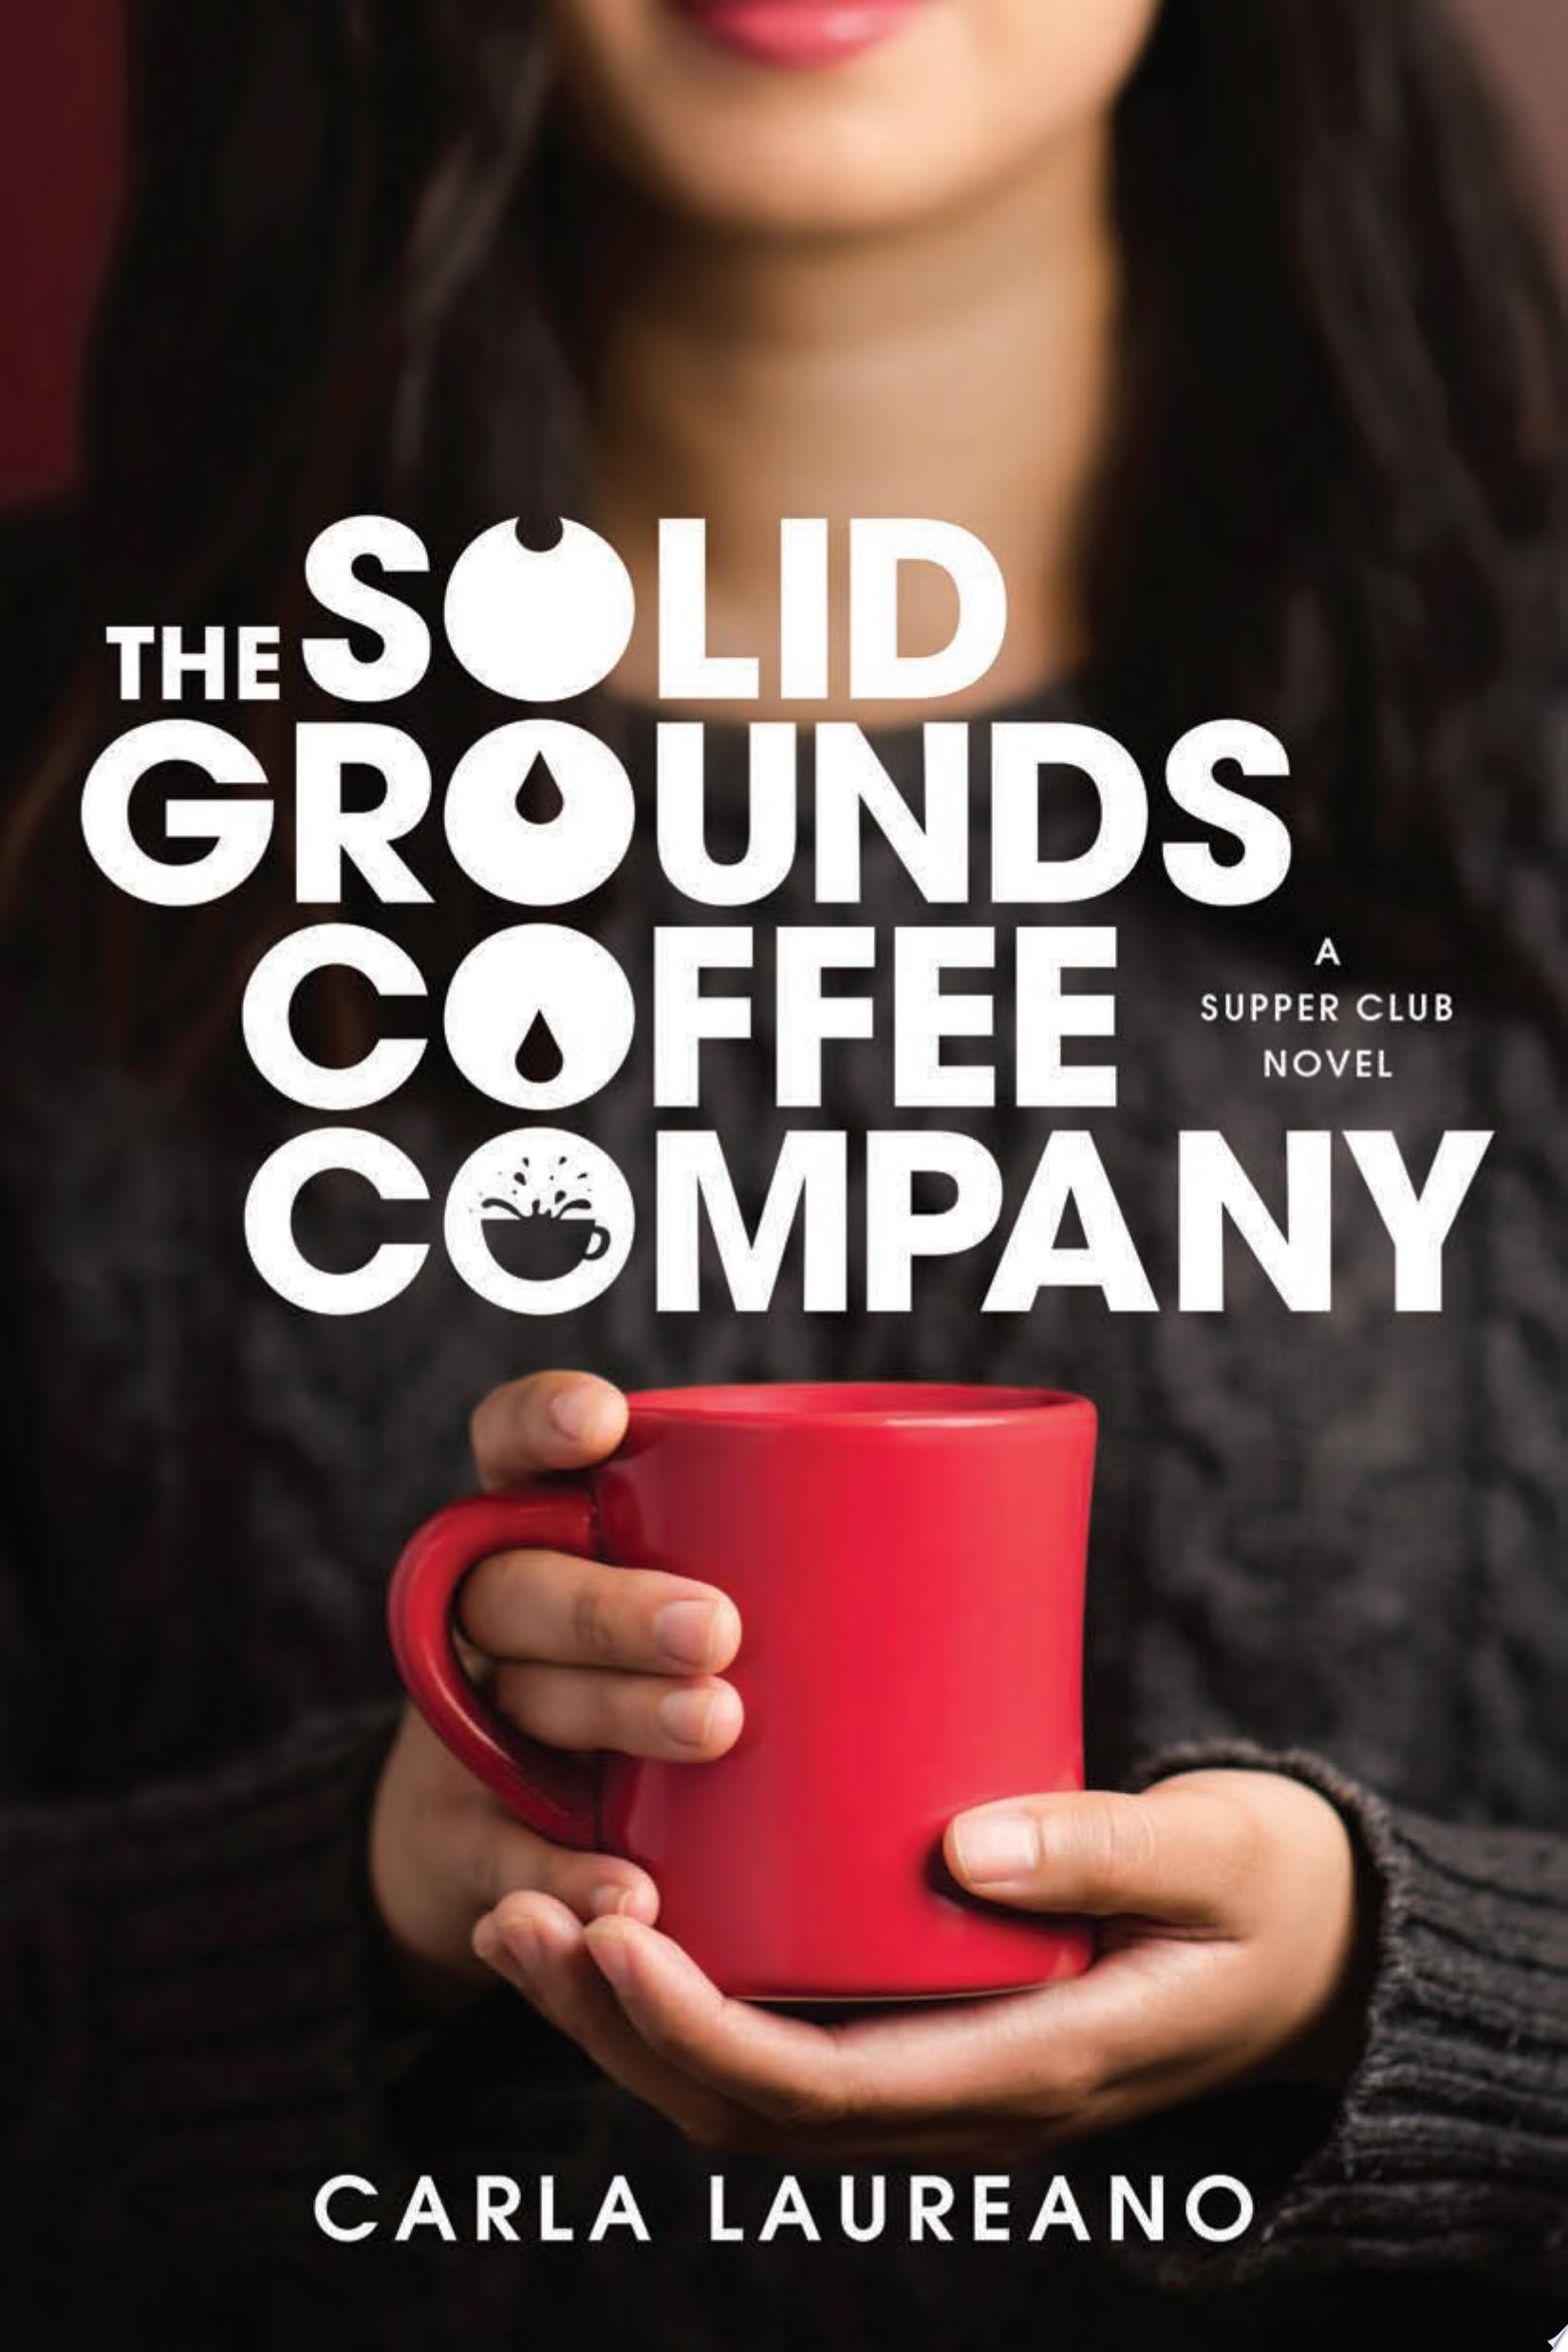 Image for "The Solid Grounds Coffee Company"